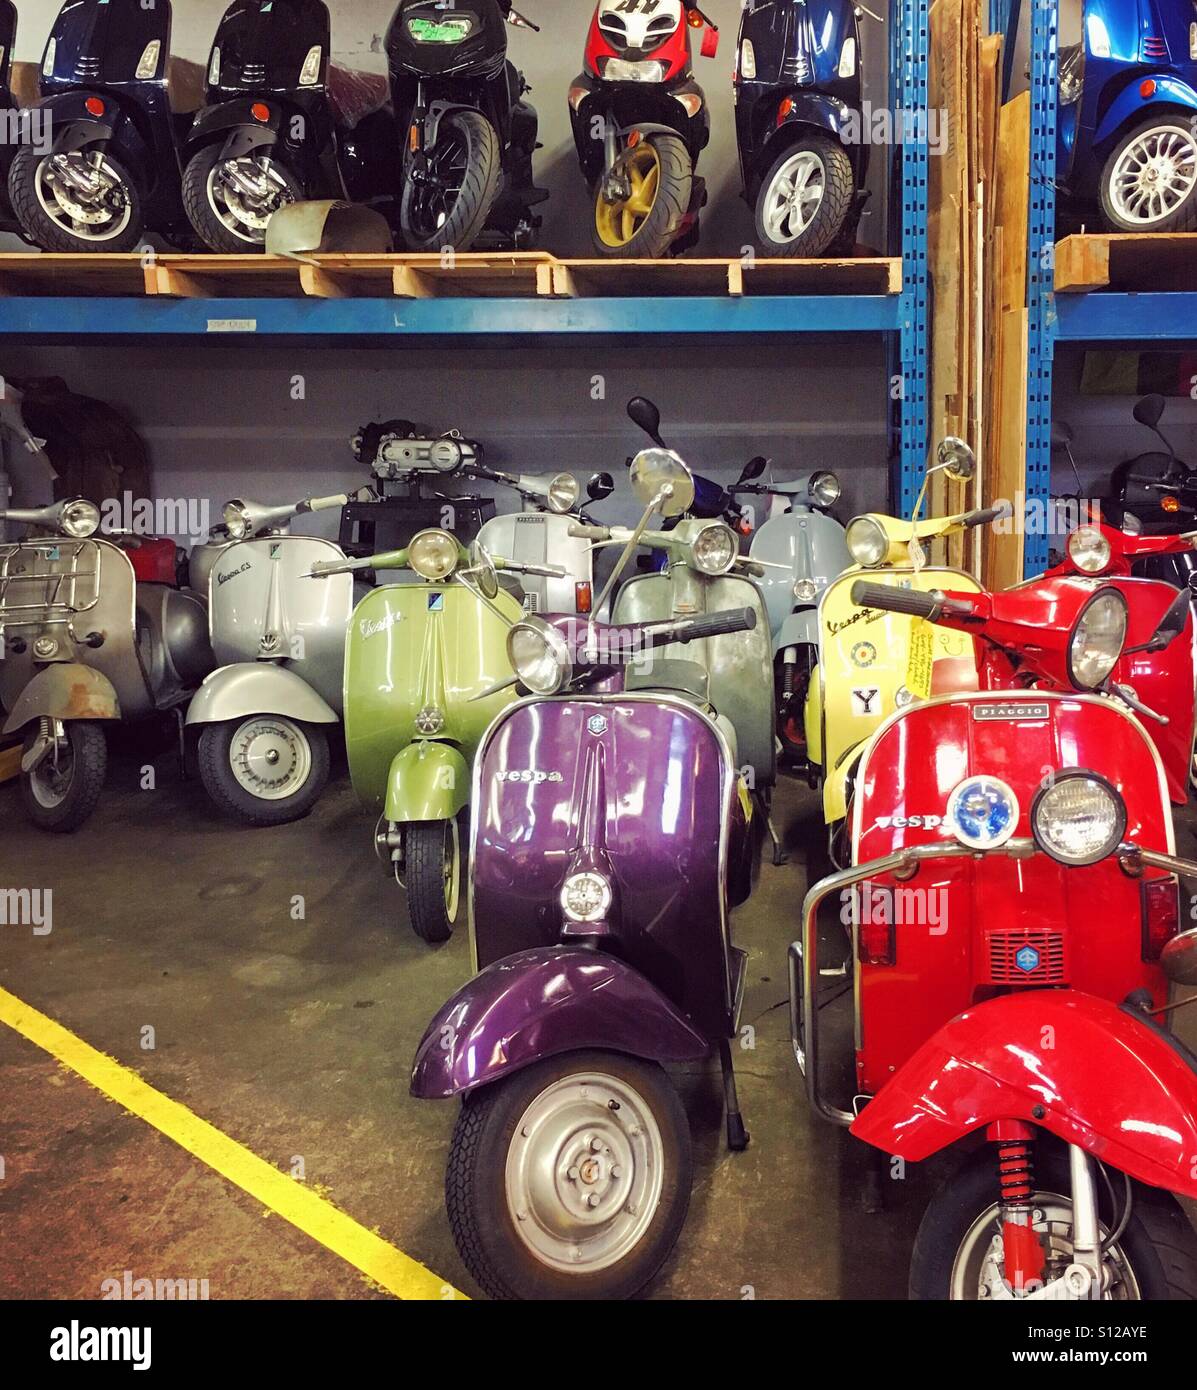 Vintage scooters in a garage Stock Photo